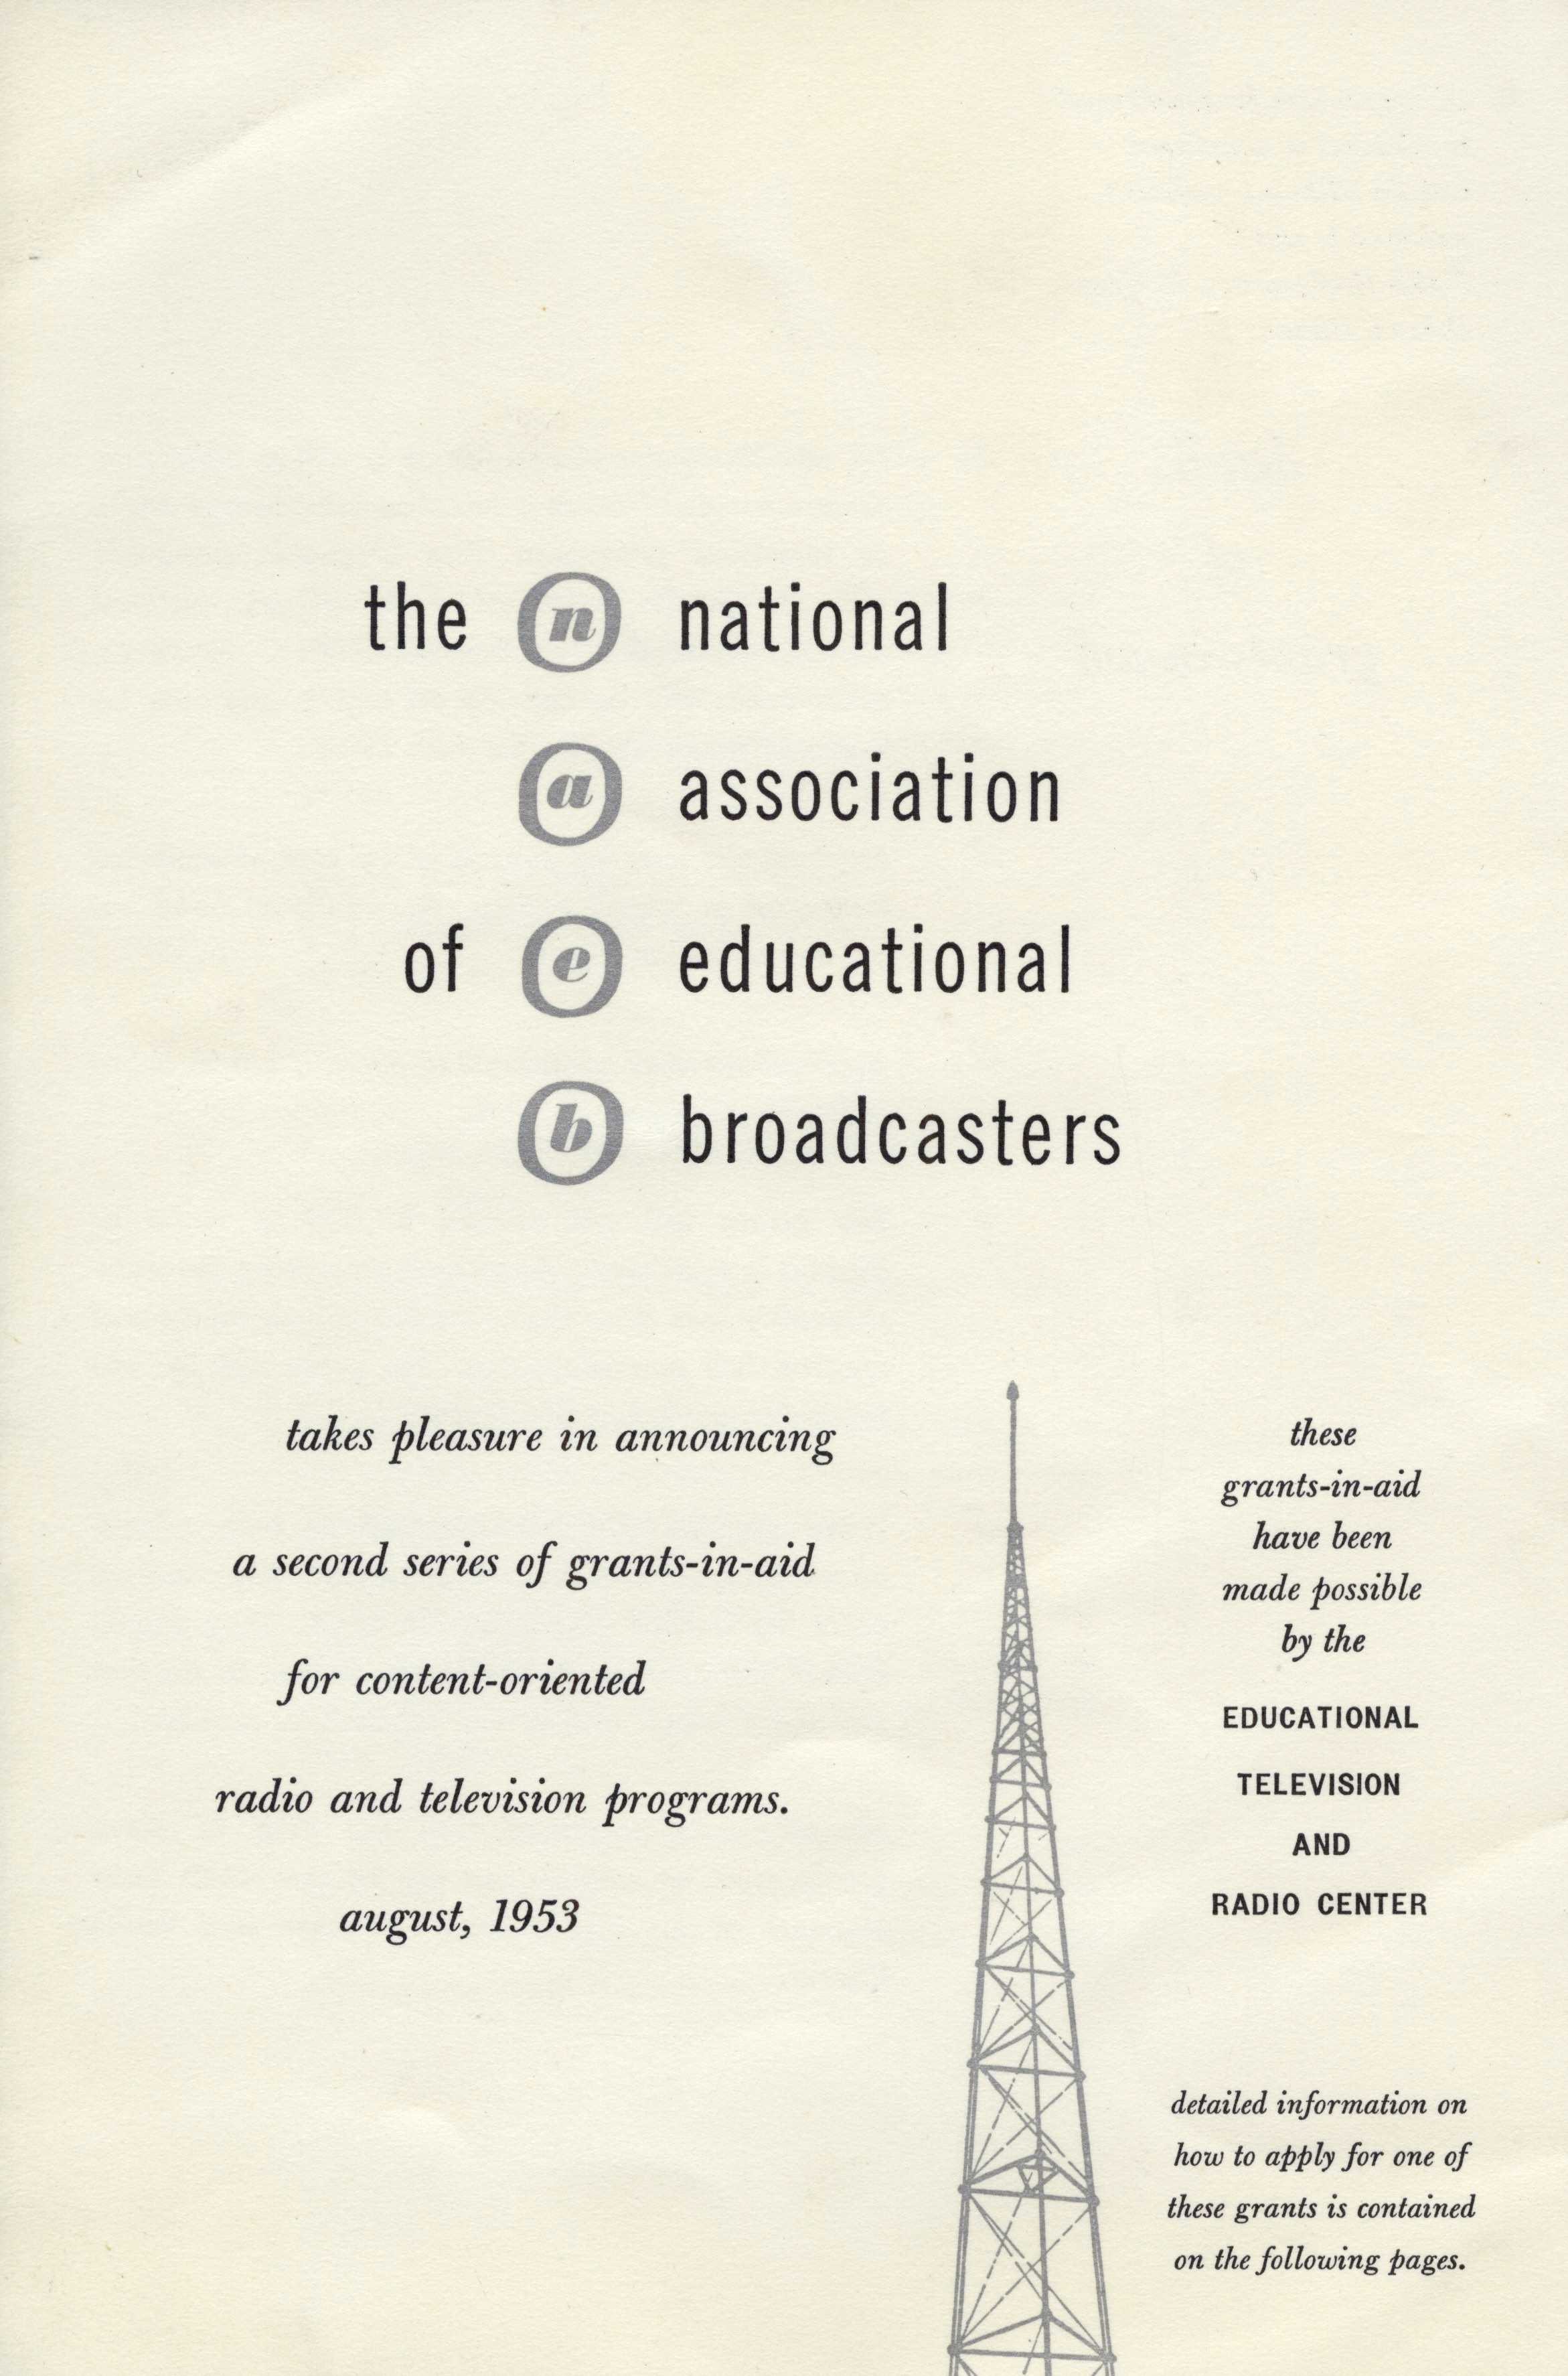 [August 1953 brochure](/document/naeb-b074-f02-17/) advertising the NAEB Grants-in-Aid for radio and television programs and detailing the application process.